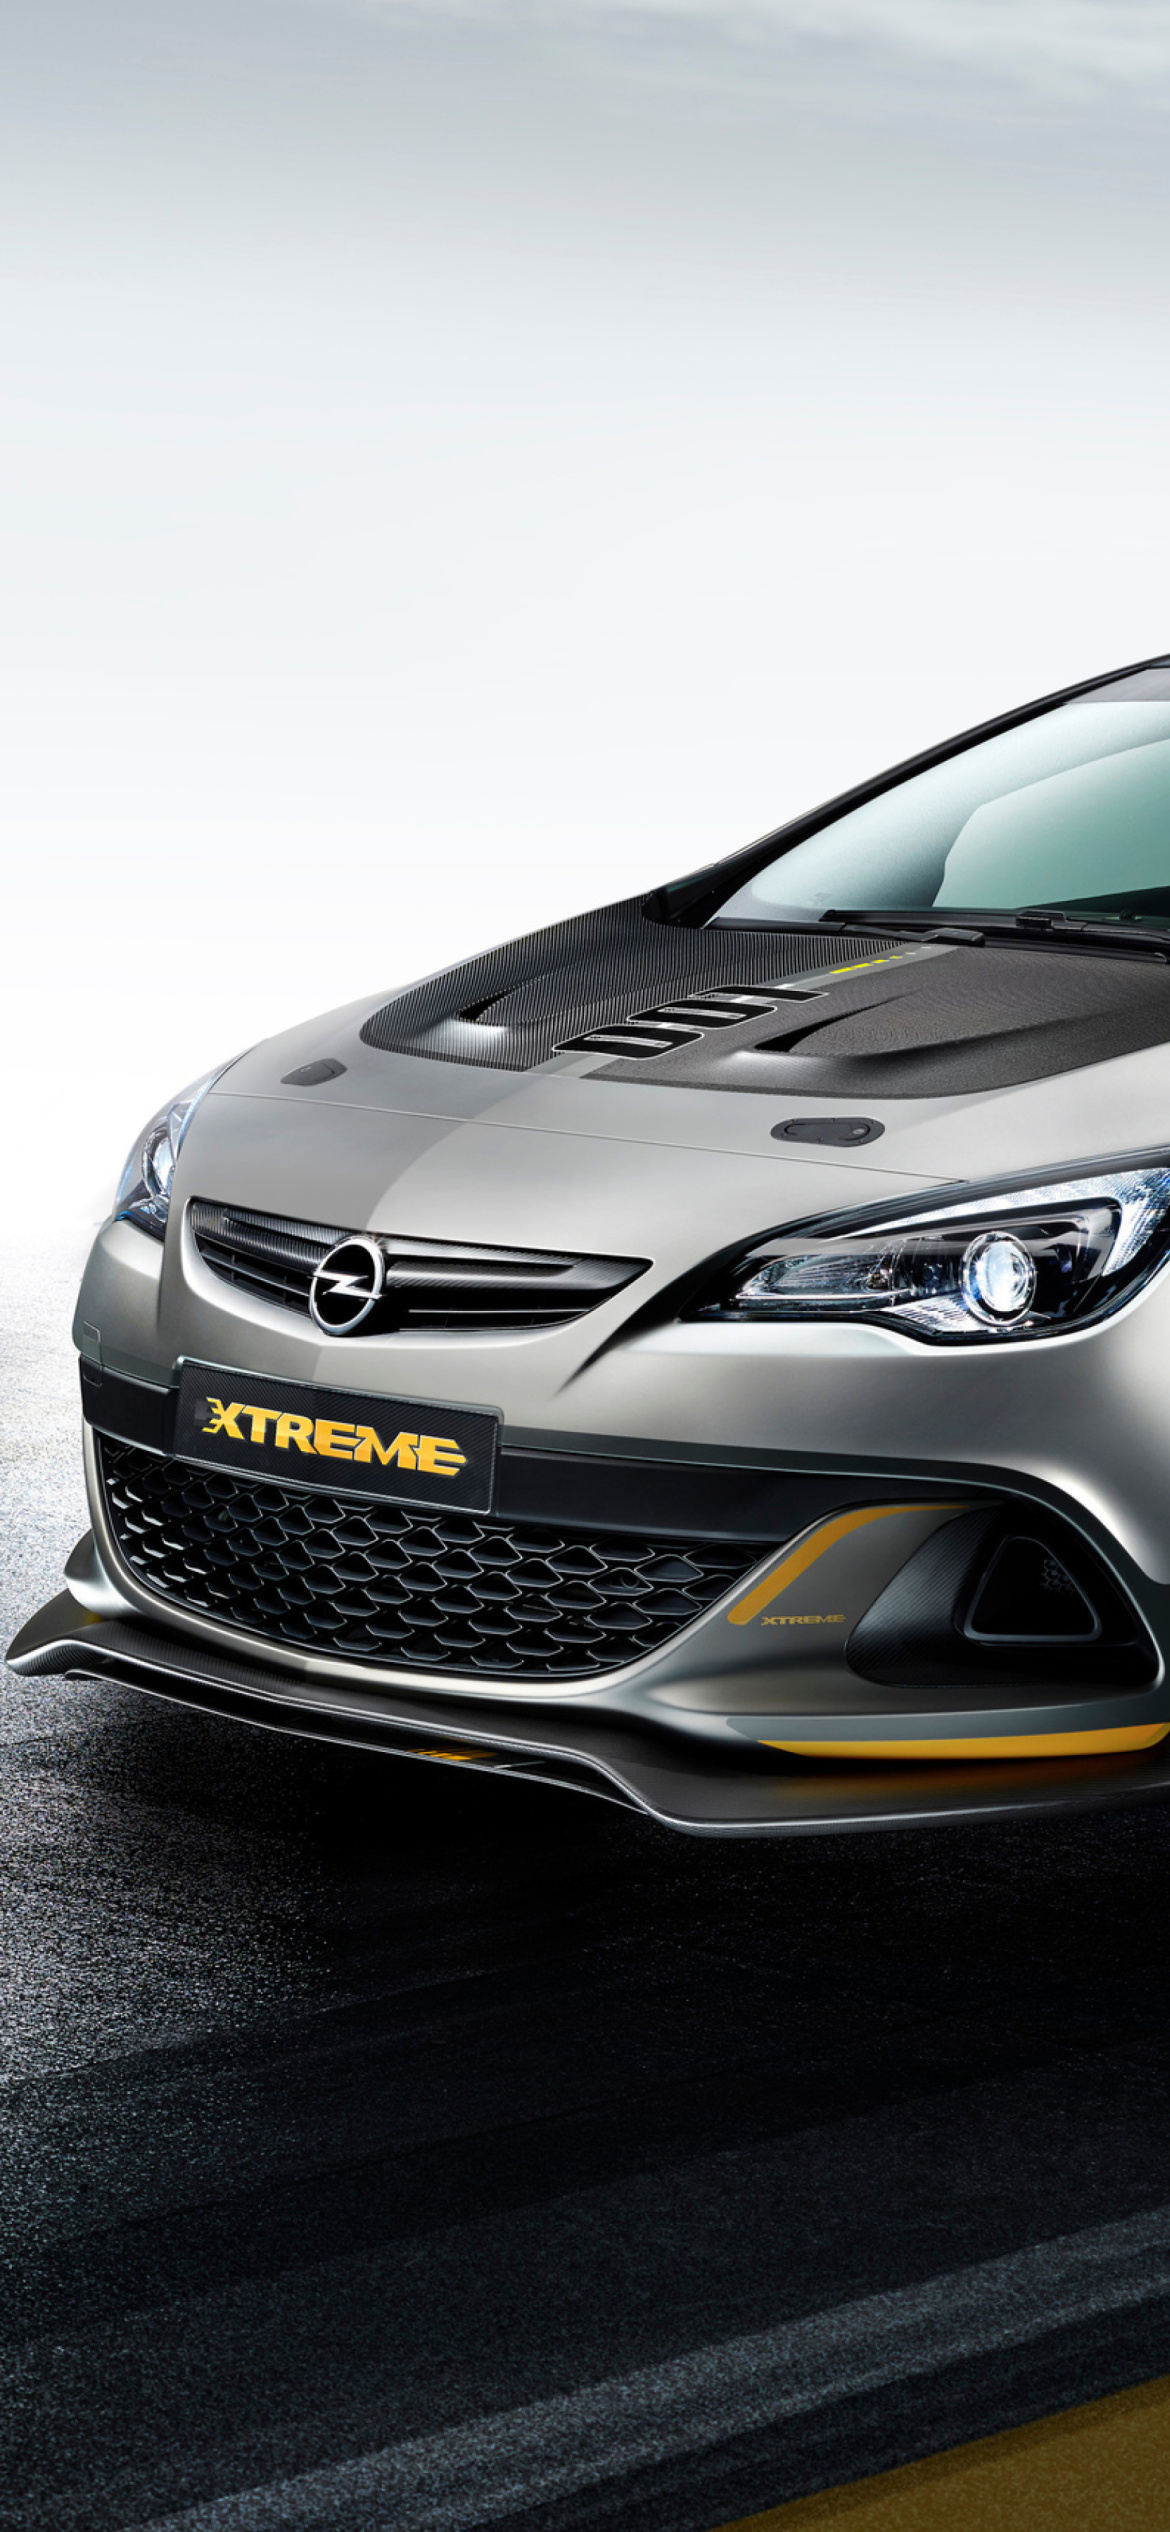 Opel Astra OPC Extreme wallpaper 1170x2532